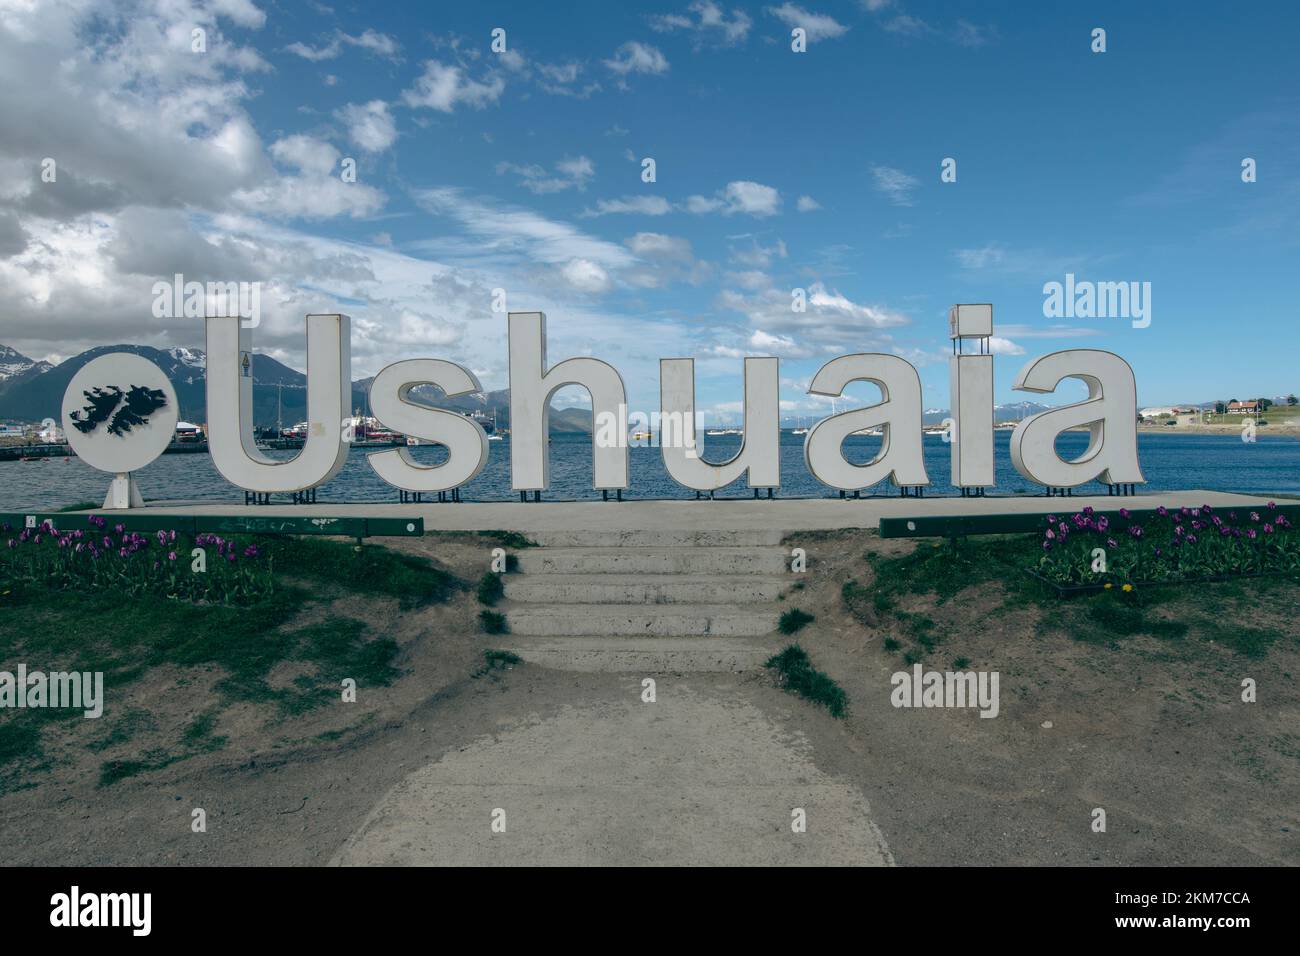 Looking out at the ocean behind the Ushuaia Sign in Argentina. Stock Photo